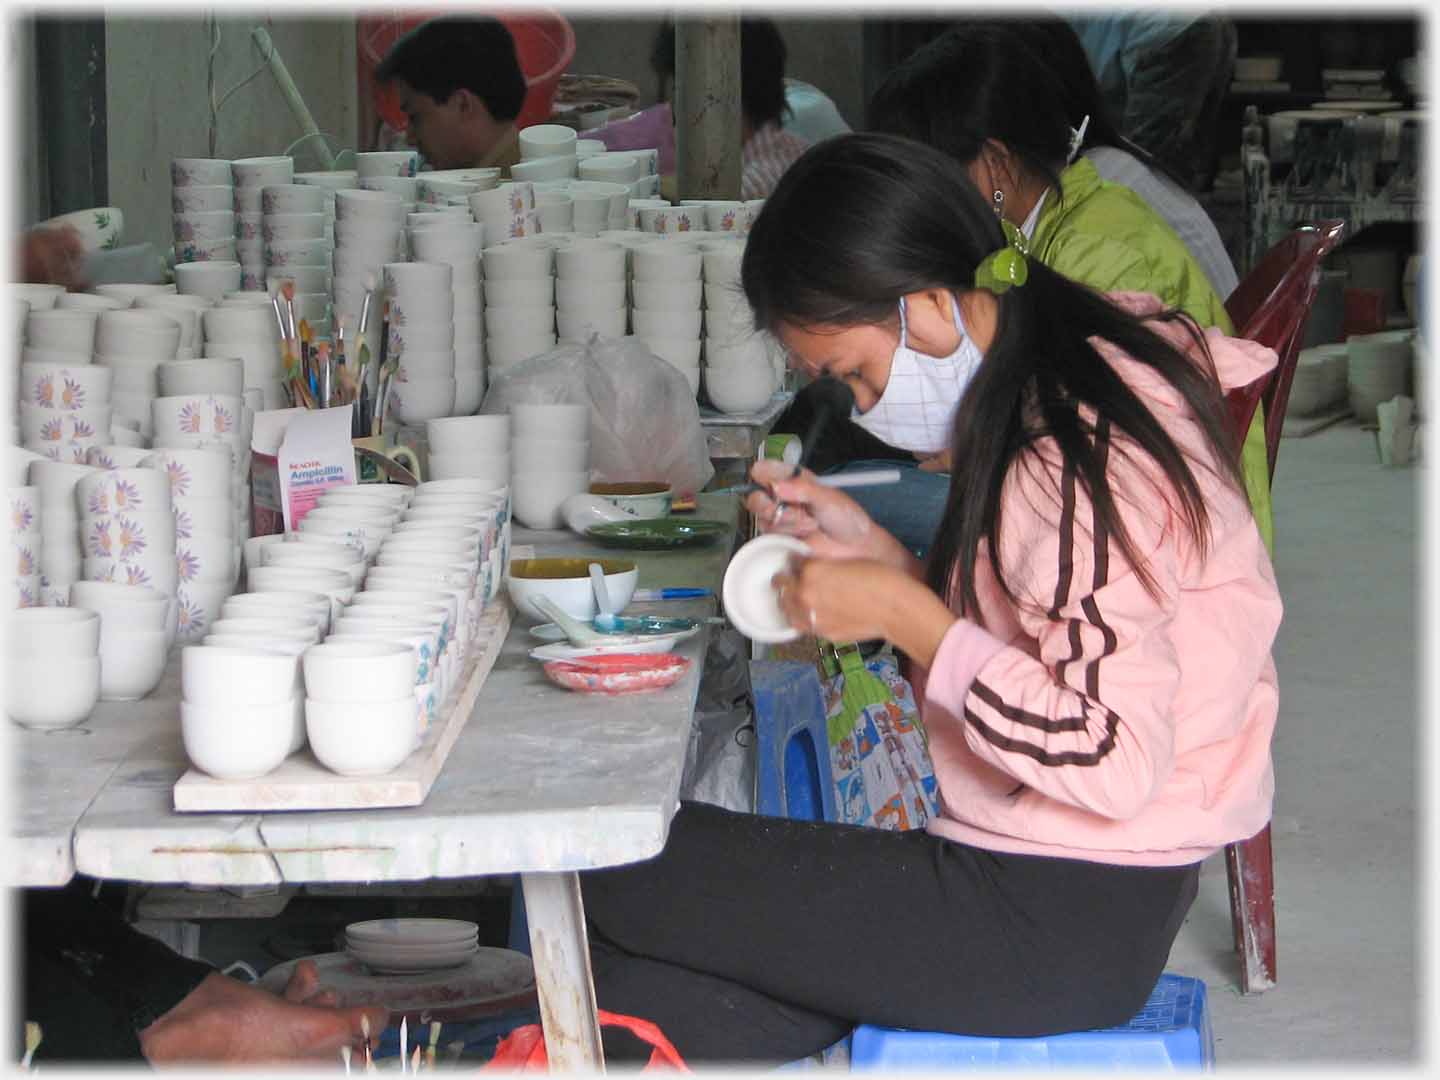 Woman sitting at table with scores of bowls stacked in front of her.